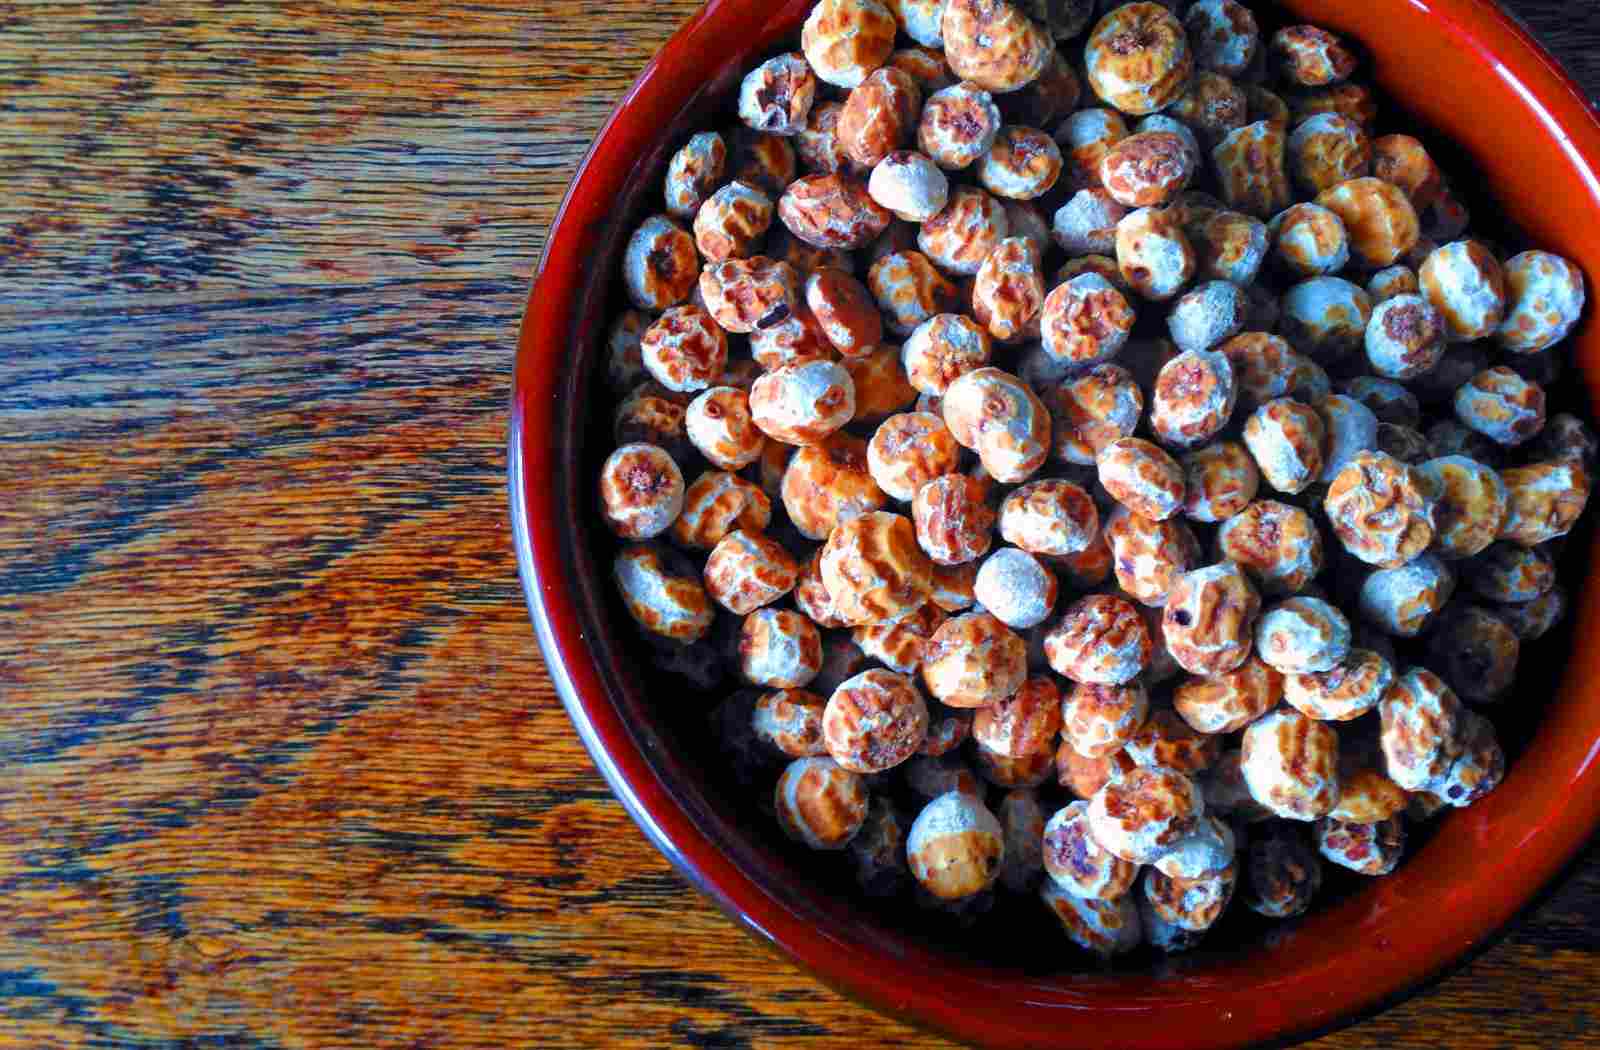 Grow your own tiger nuts